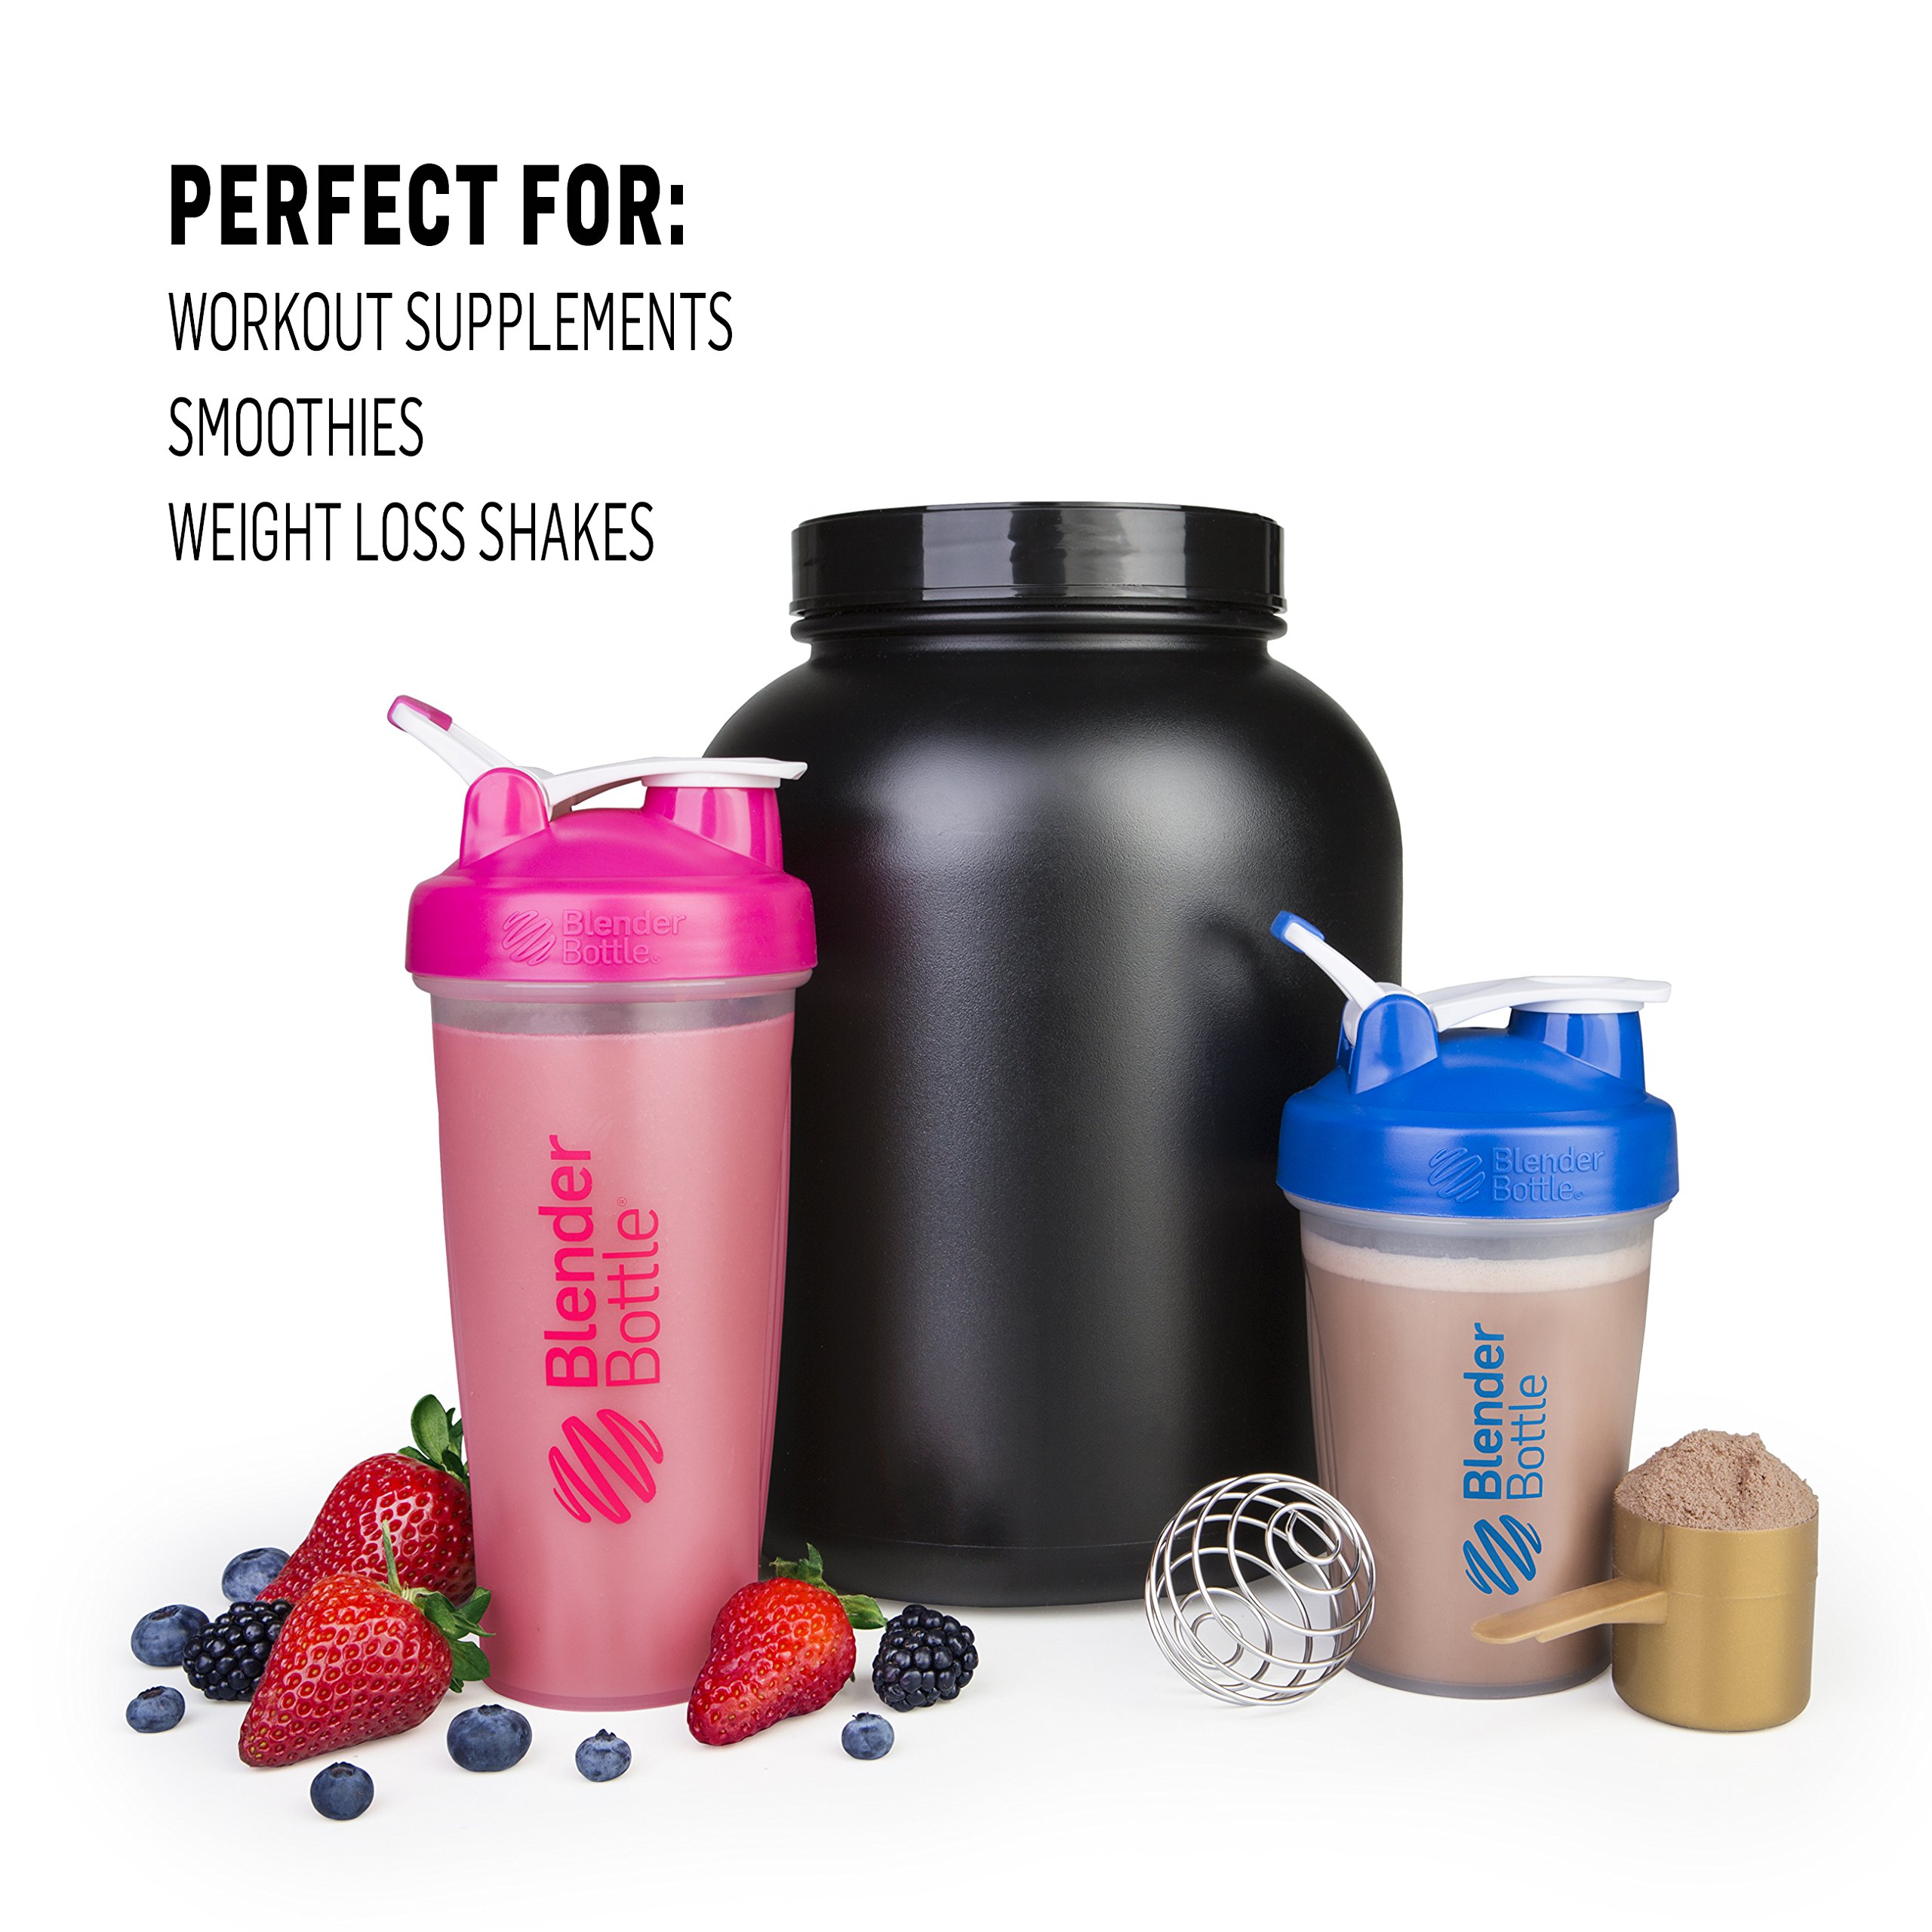 BlenderBottle Classic Shaker Bottle Perfect for Protein Shakes and Pre Workout, 28-Ounce (2 Pack), Moss/Moss and Navy/Navy